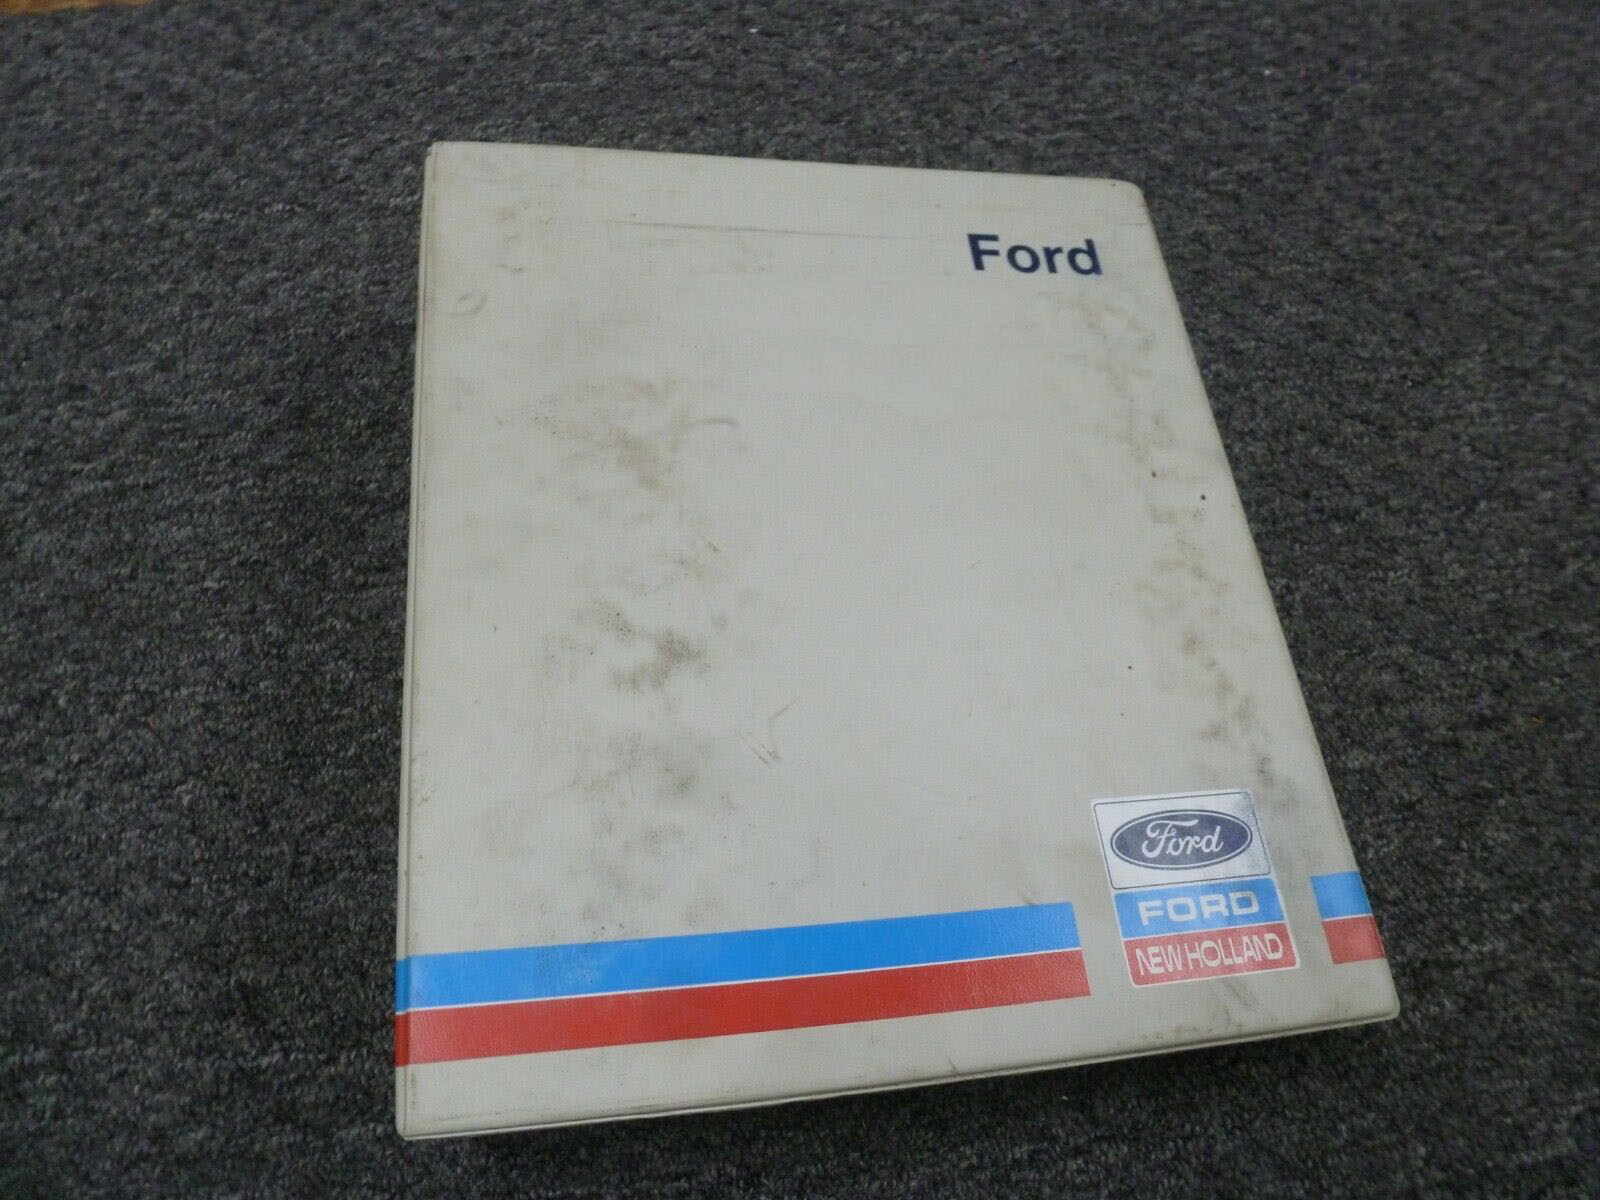 Service Manual for FORD Tractors model 120